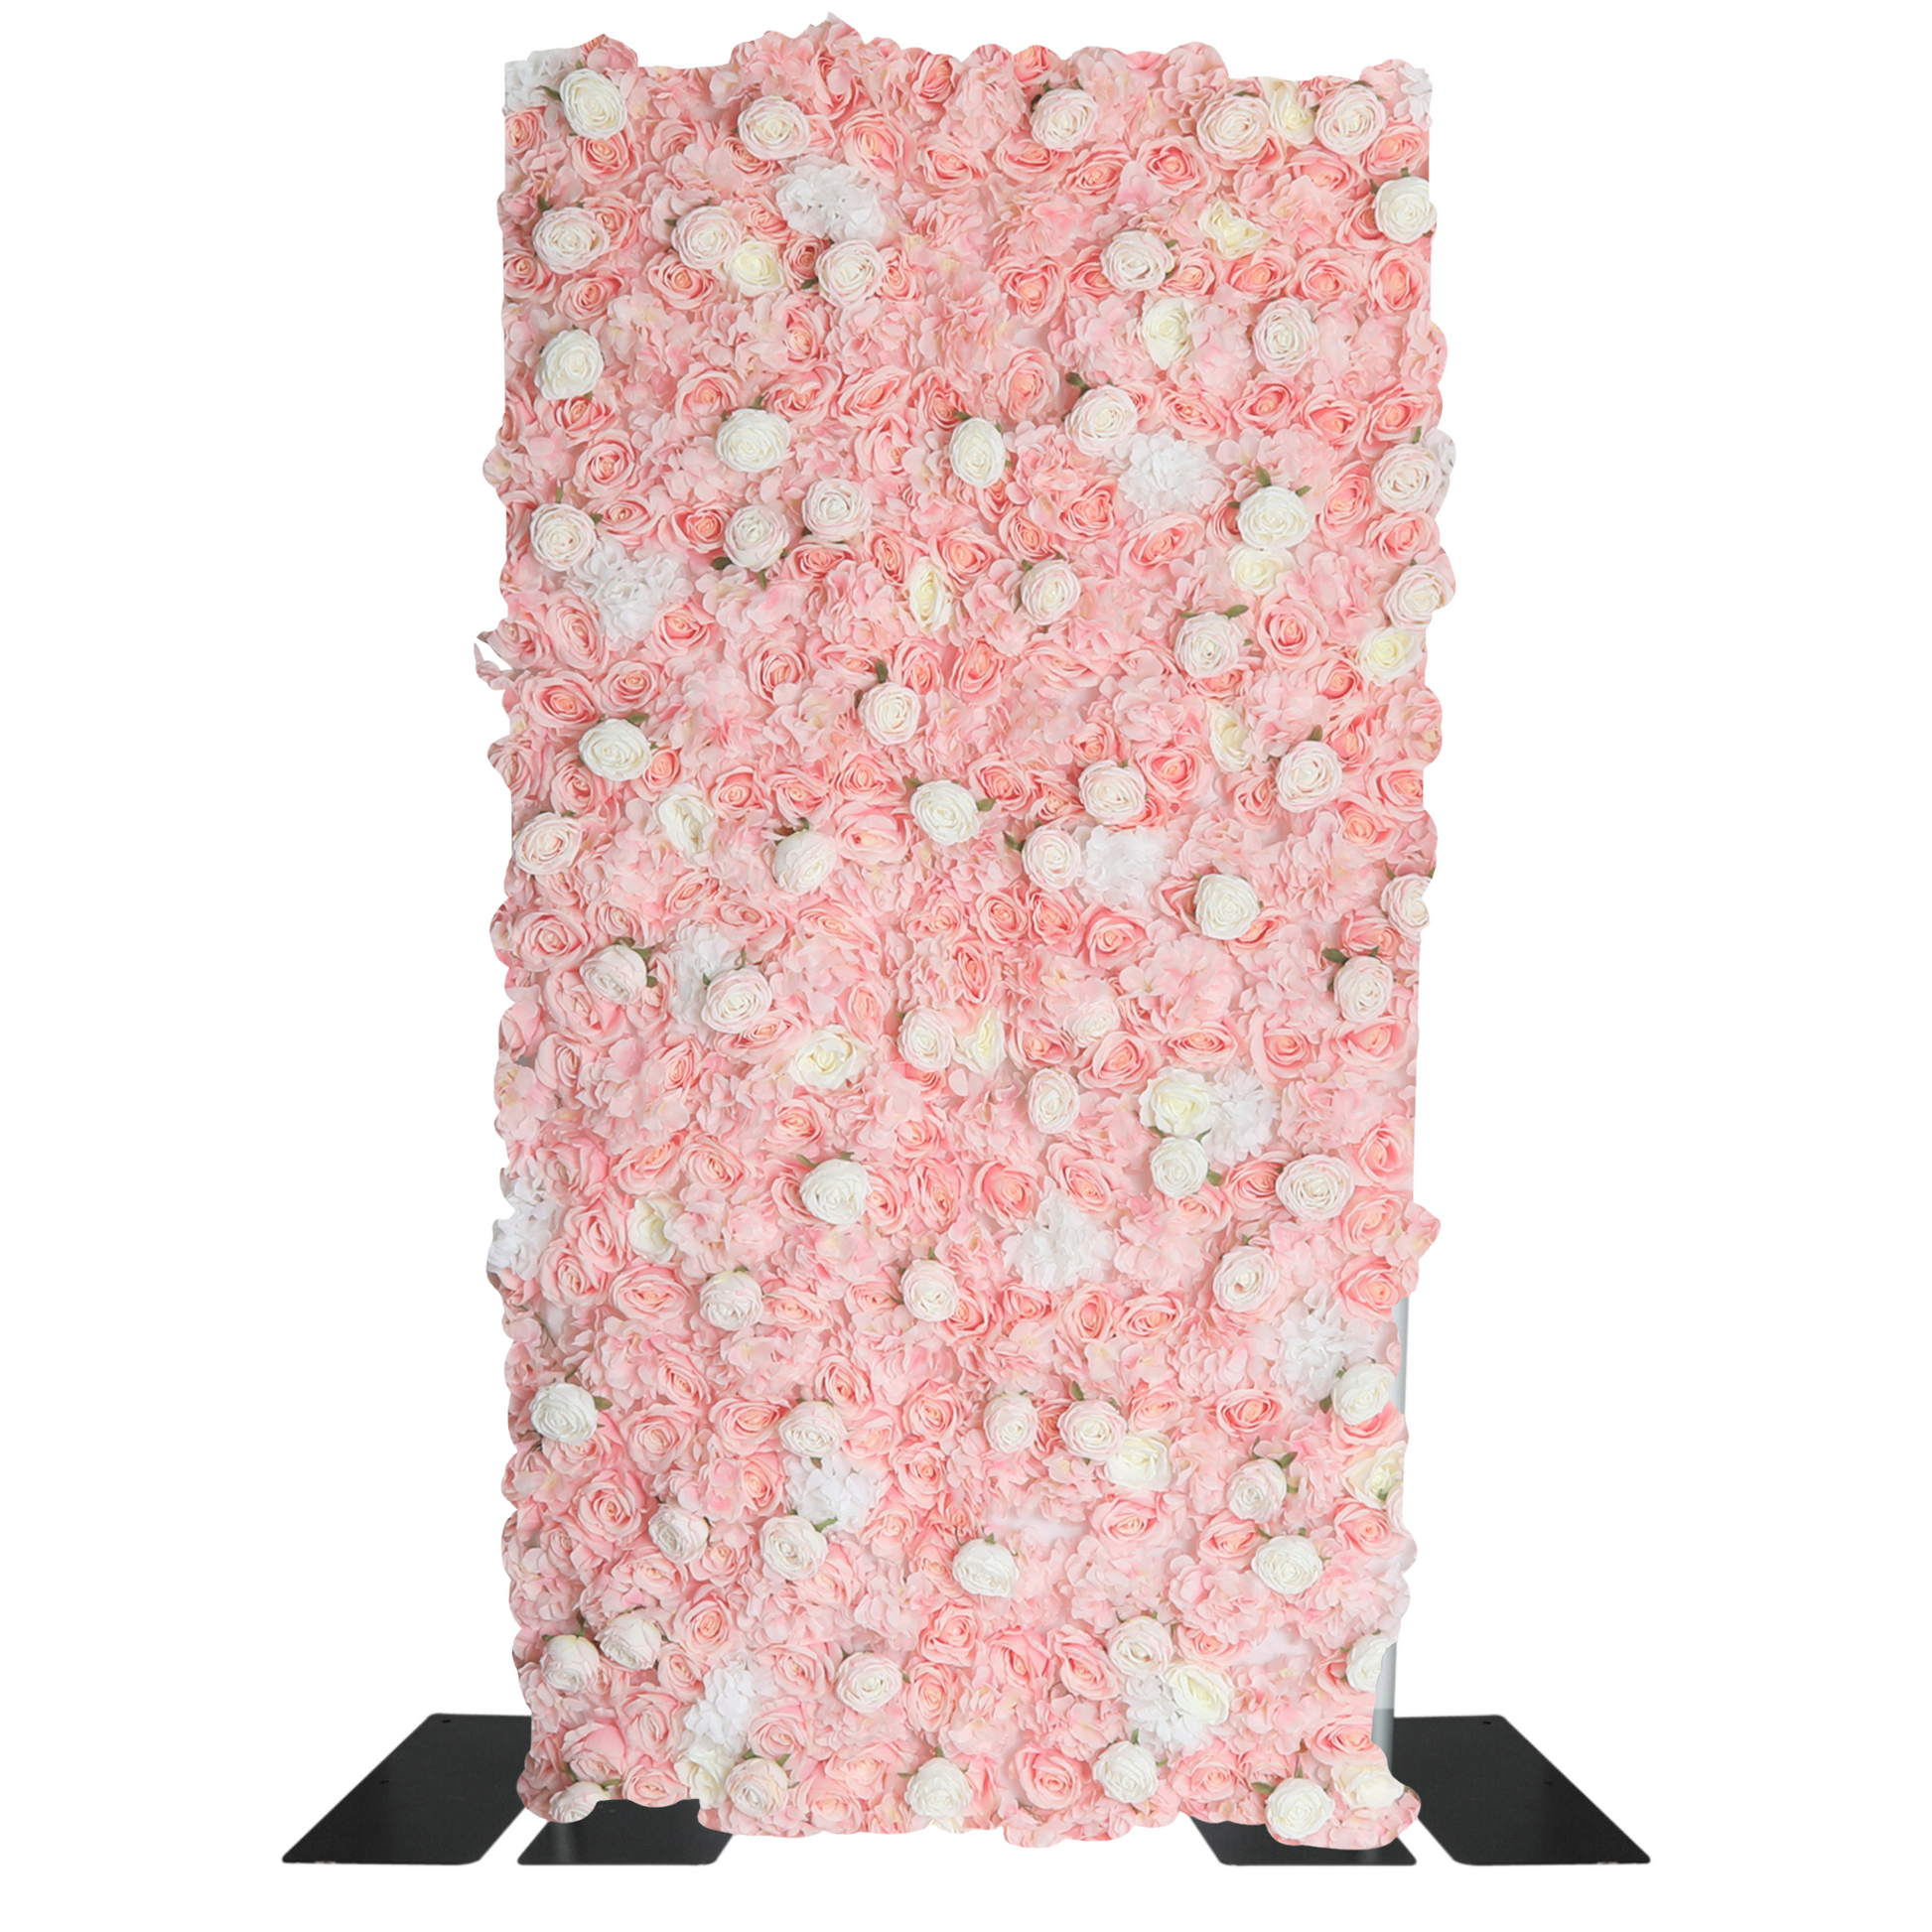 Roll Up Flower Wall Backdrop 8ft x 4ft - Pink